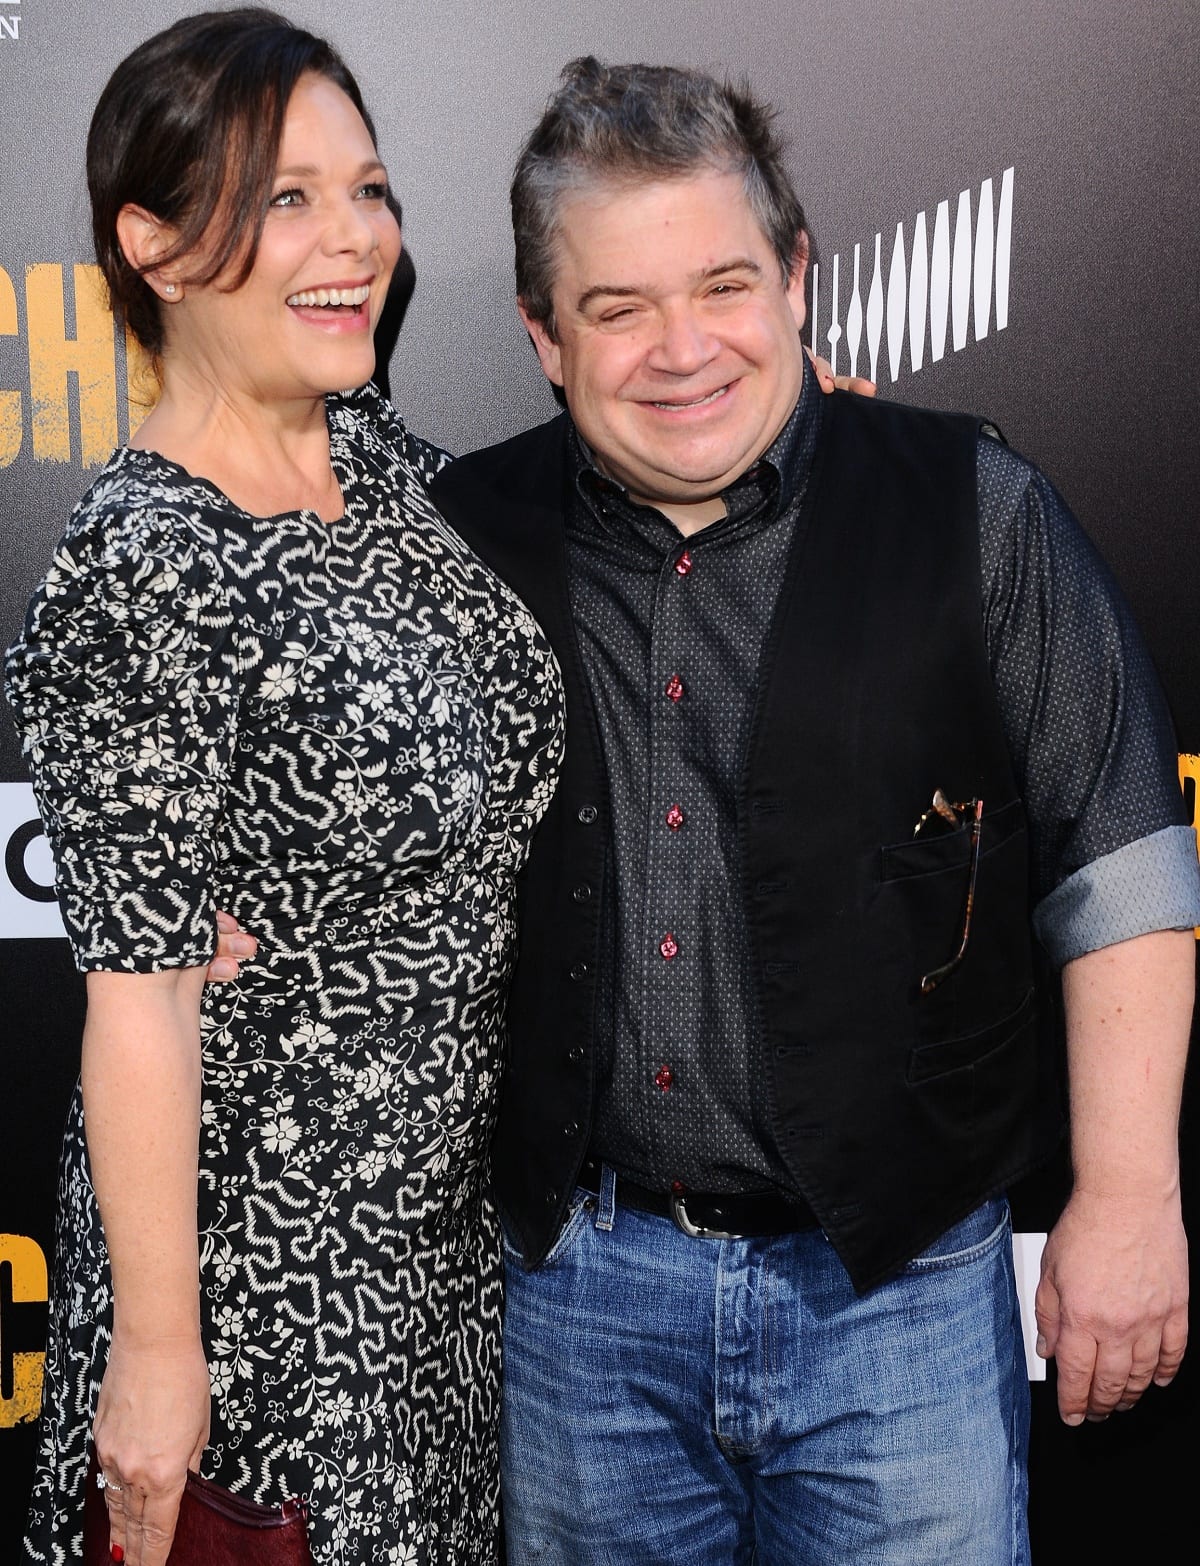 Patton Oswalt found love and laughter in Meredith Salenger after a tragedy struck his family